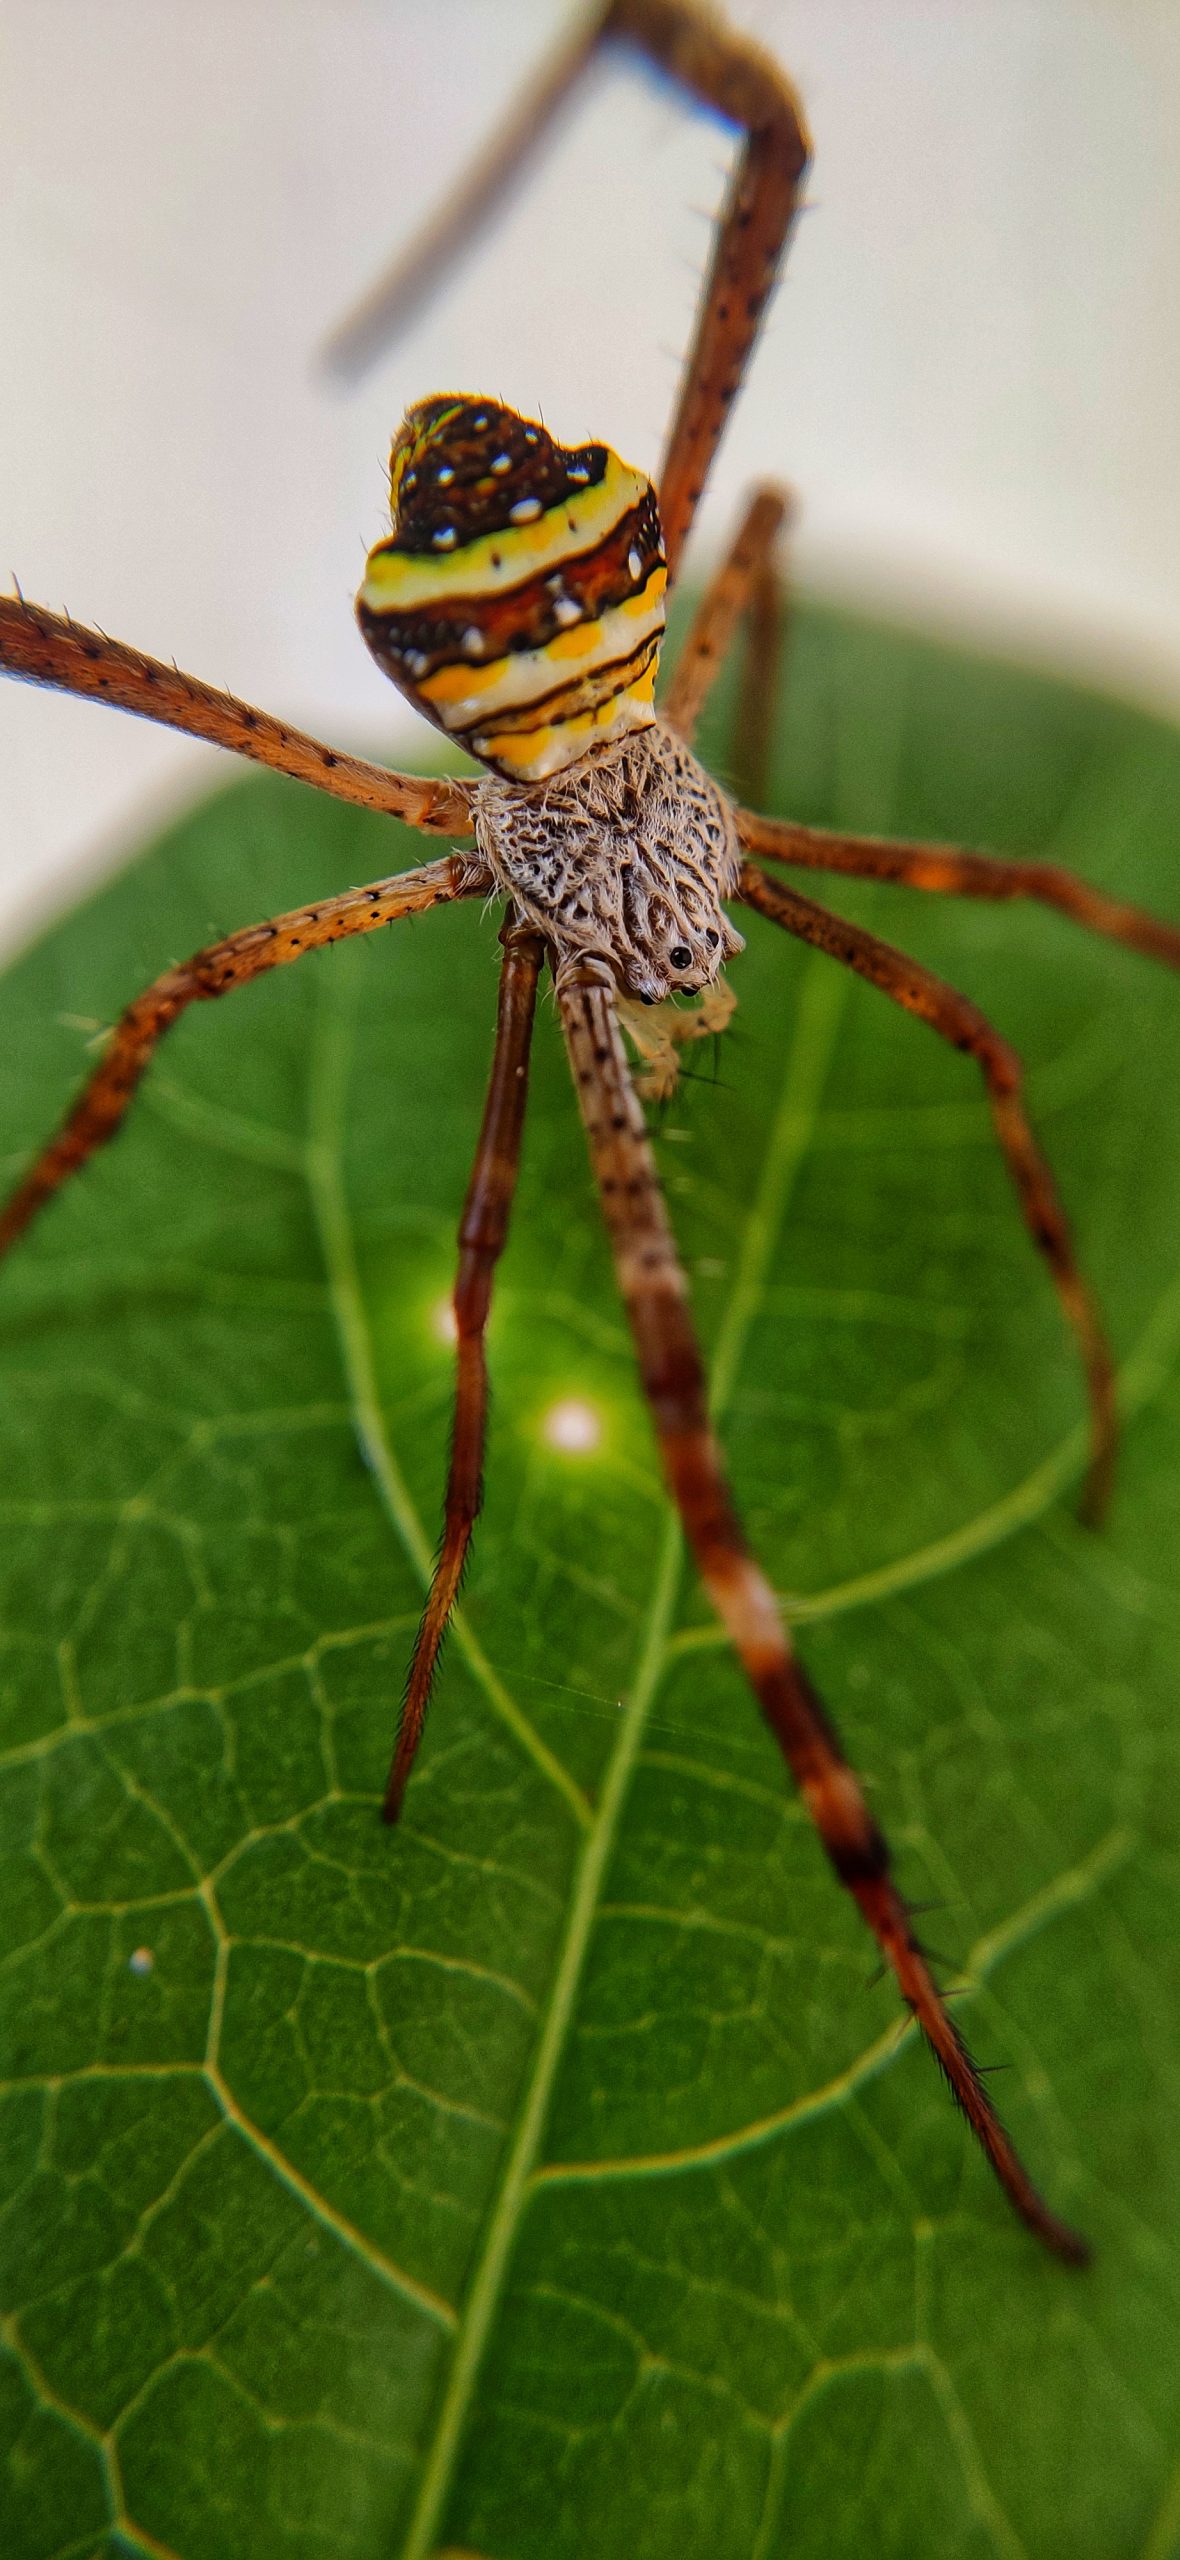 A spider on a leaf